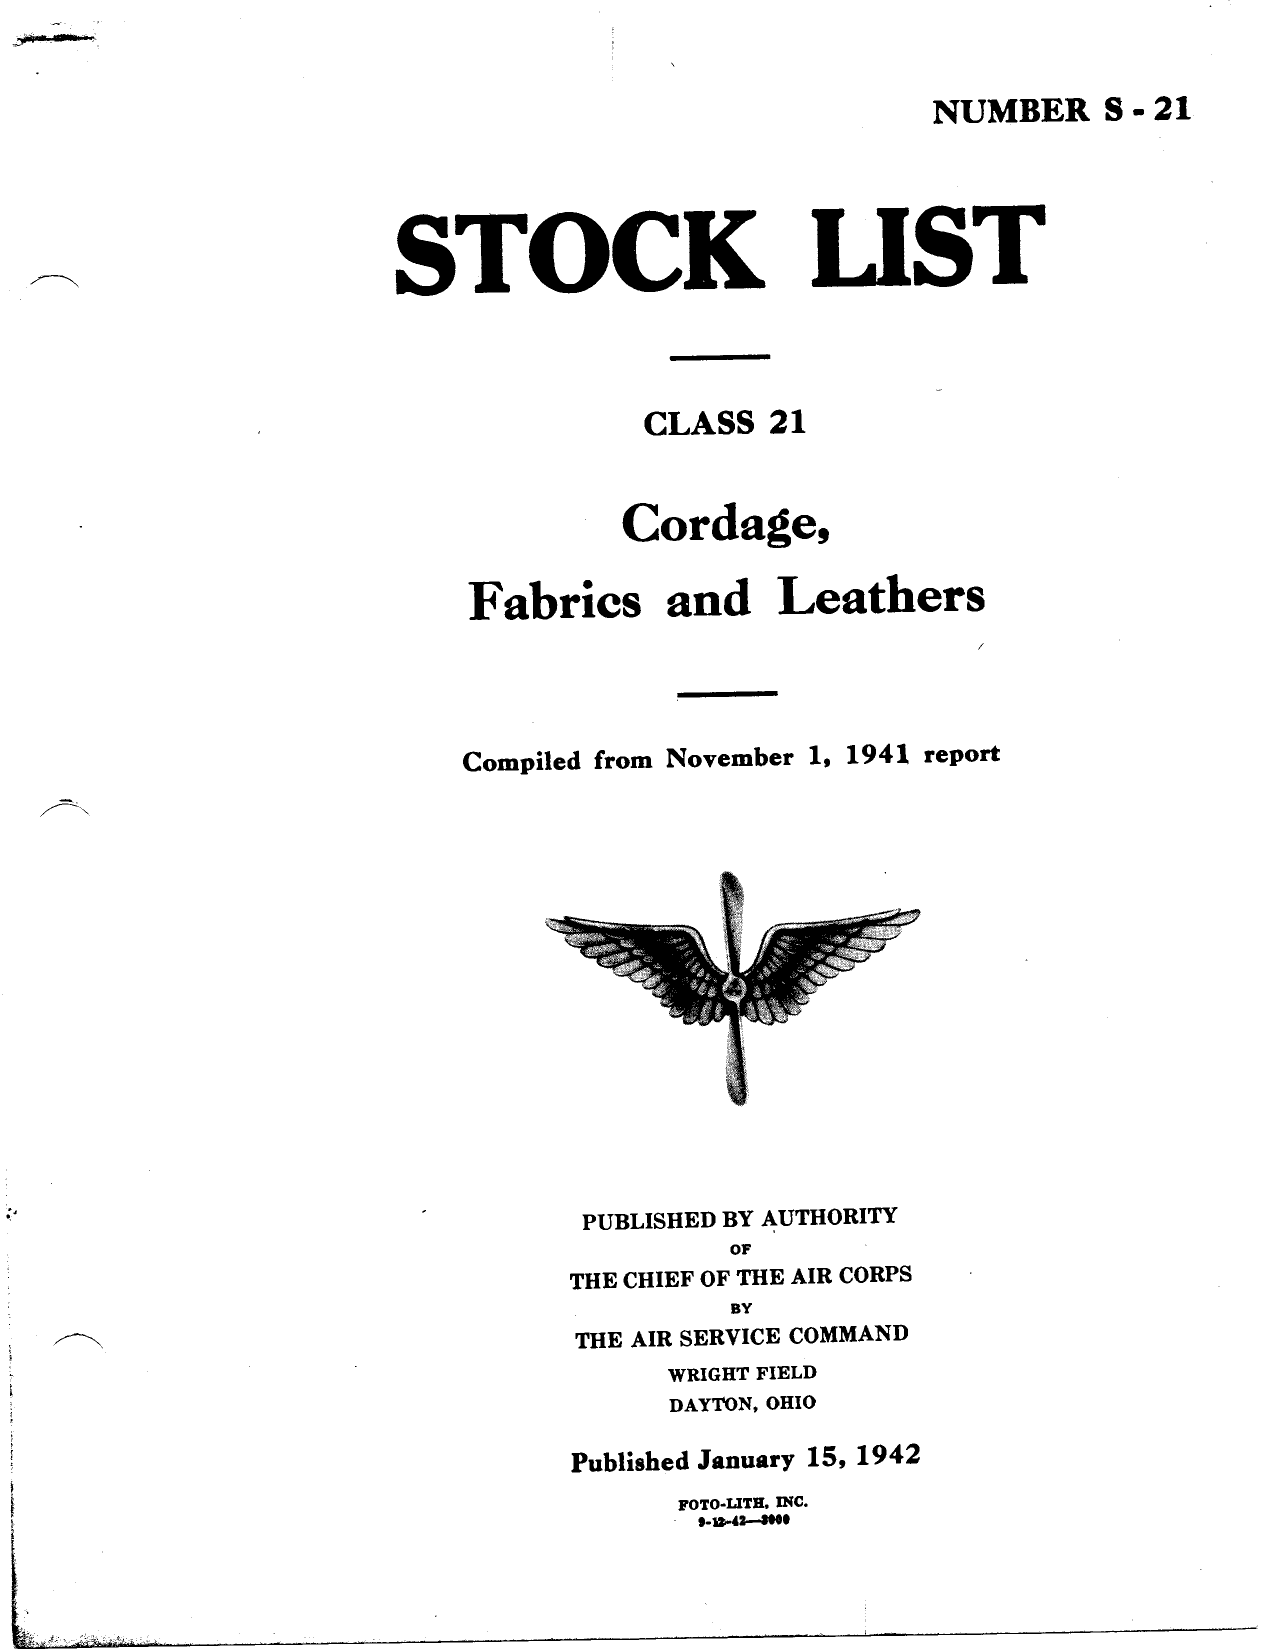 Sample page 1 from AirCorps Library document: Stock List for Cordage, Fabrics, and Leathers